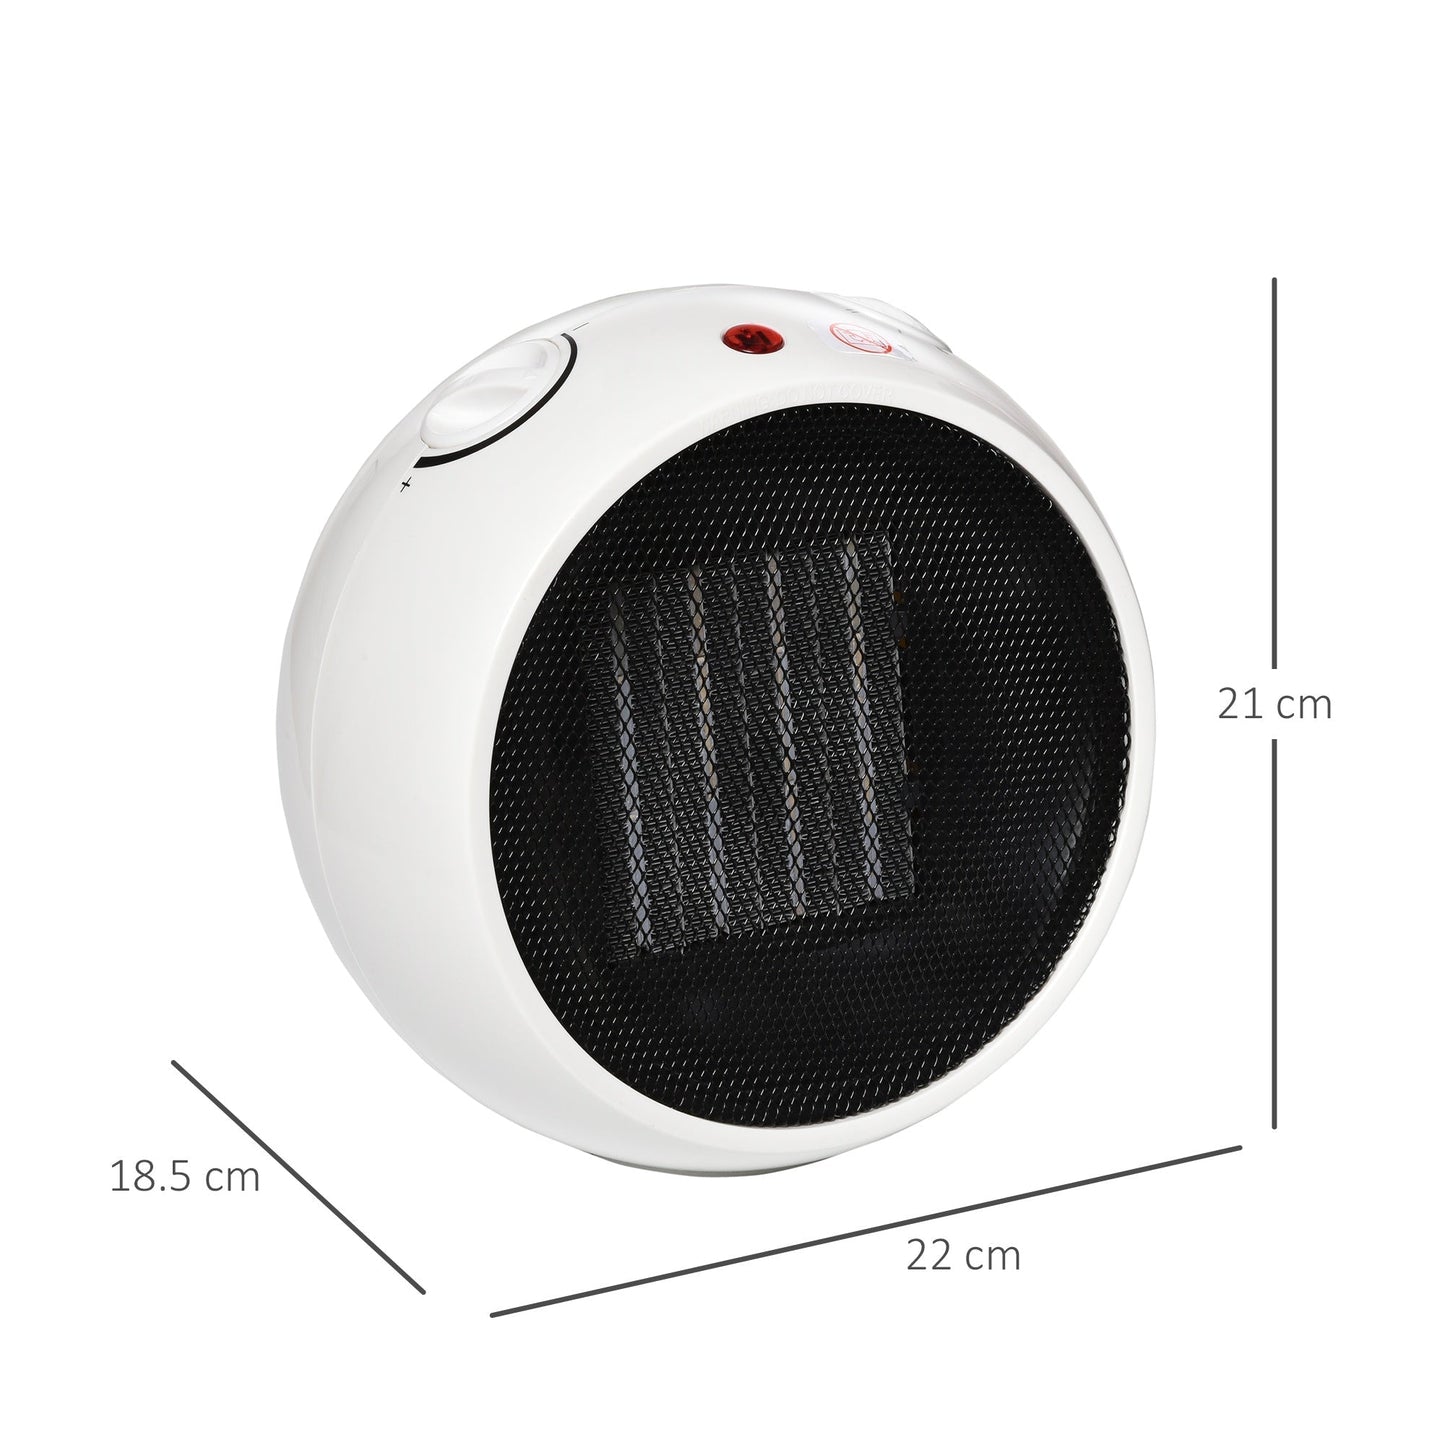 Maplin Plus Small Space Ceramic Heater with 3 Heating Modes & Adjustable Temperature - maplin.co.uk